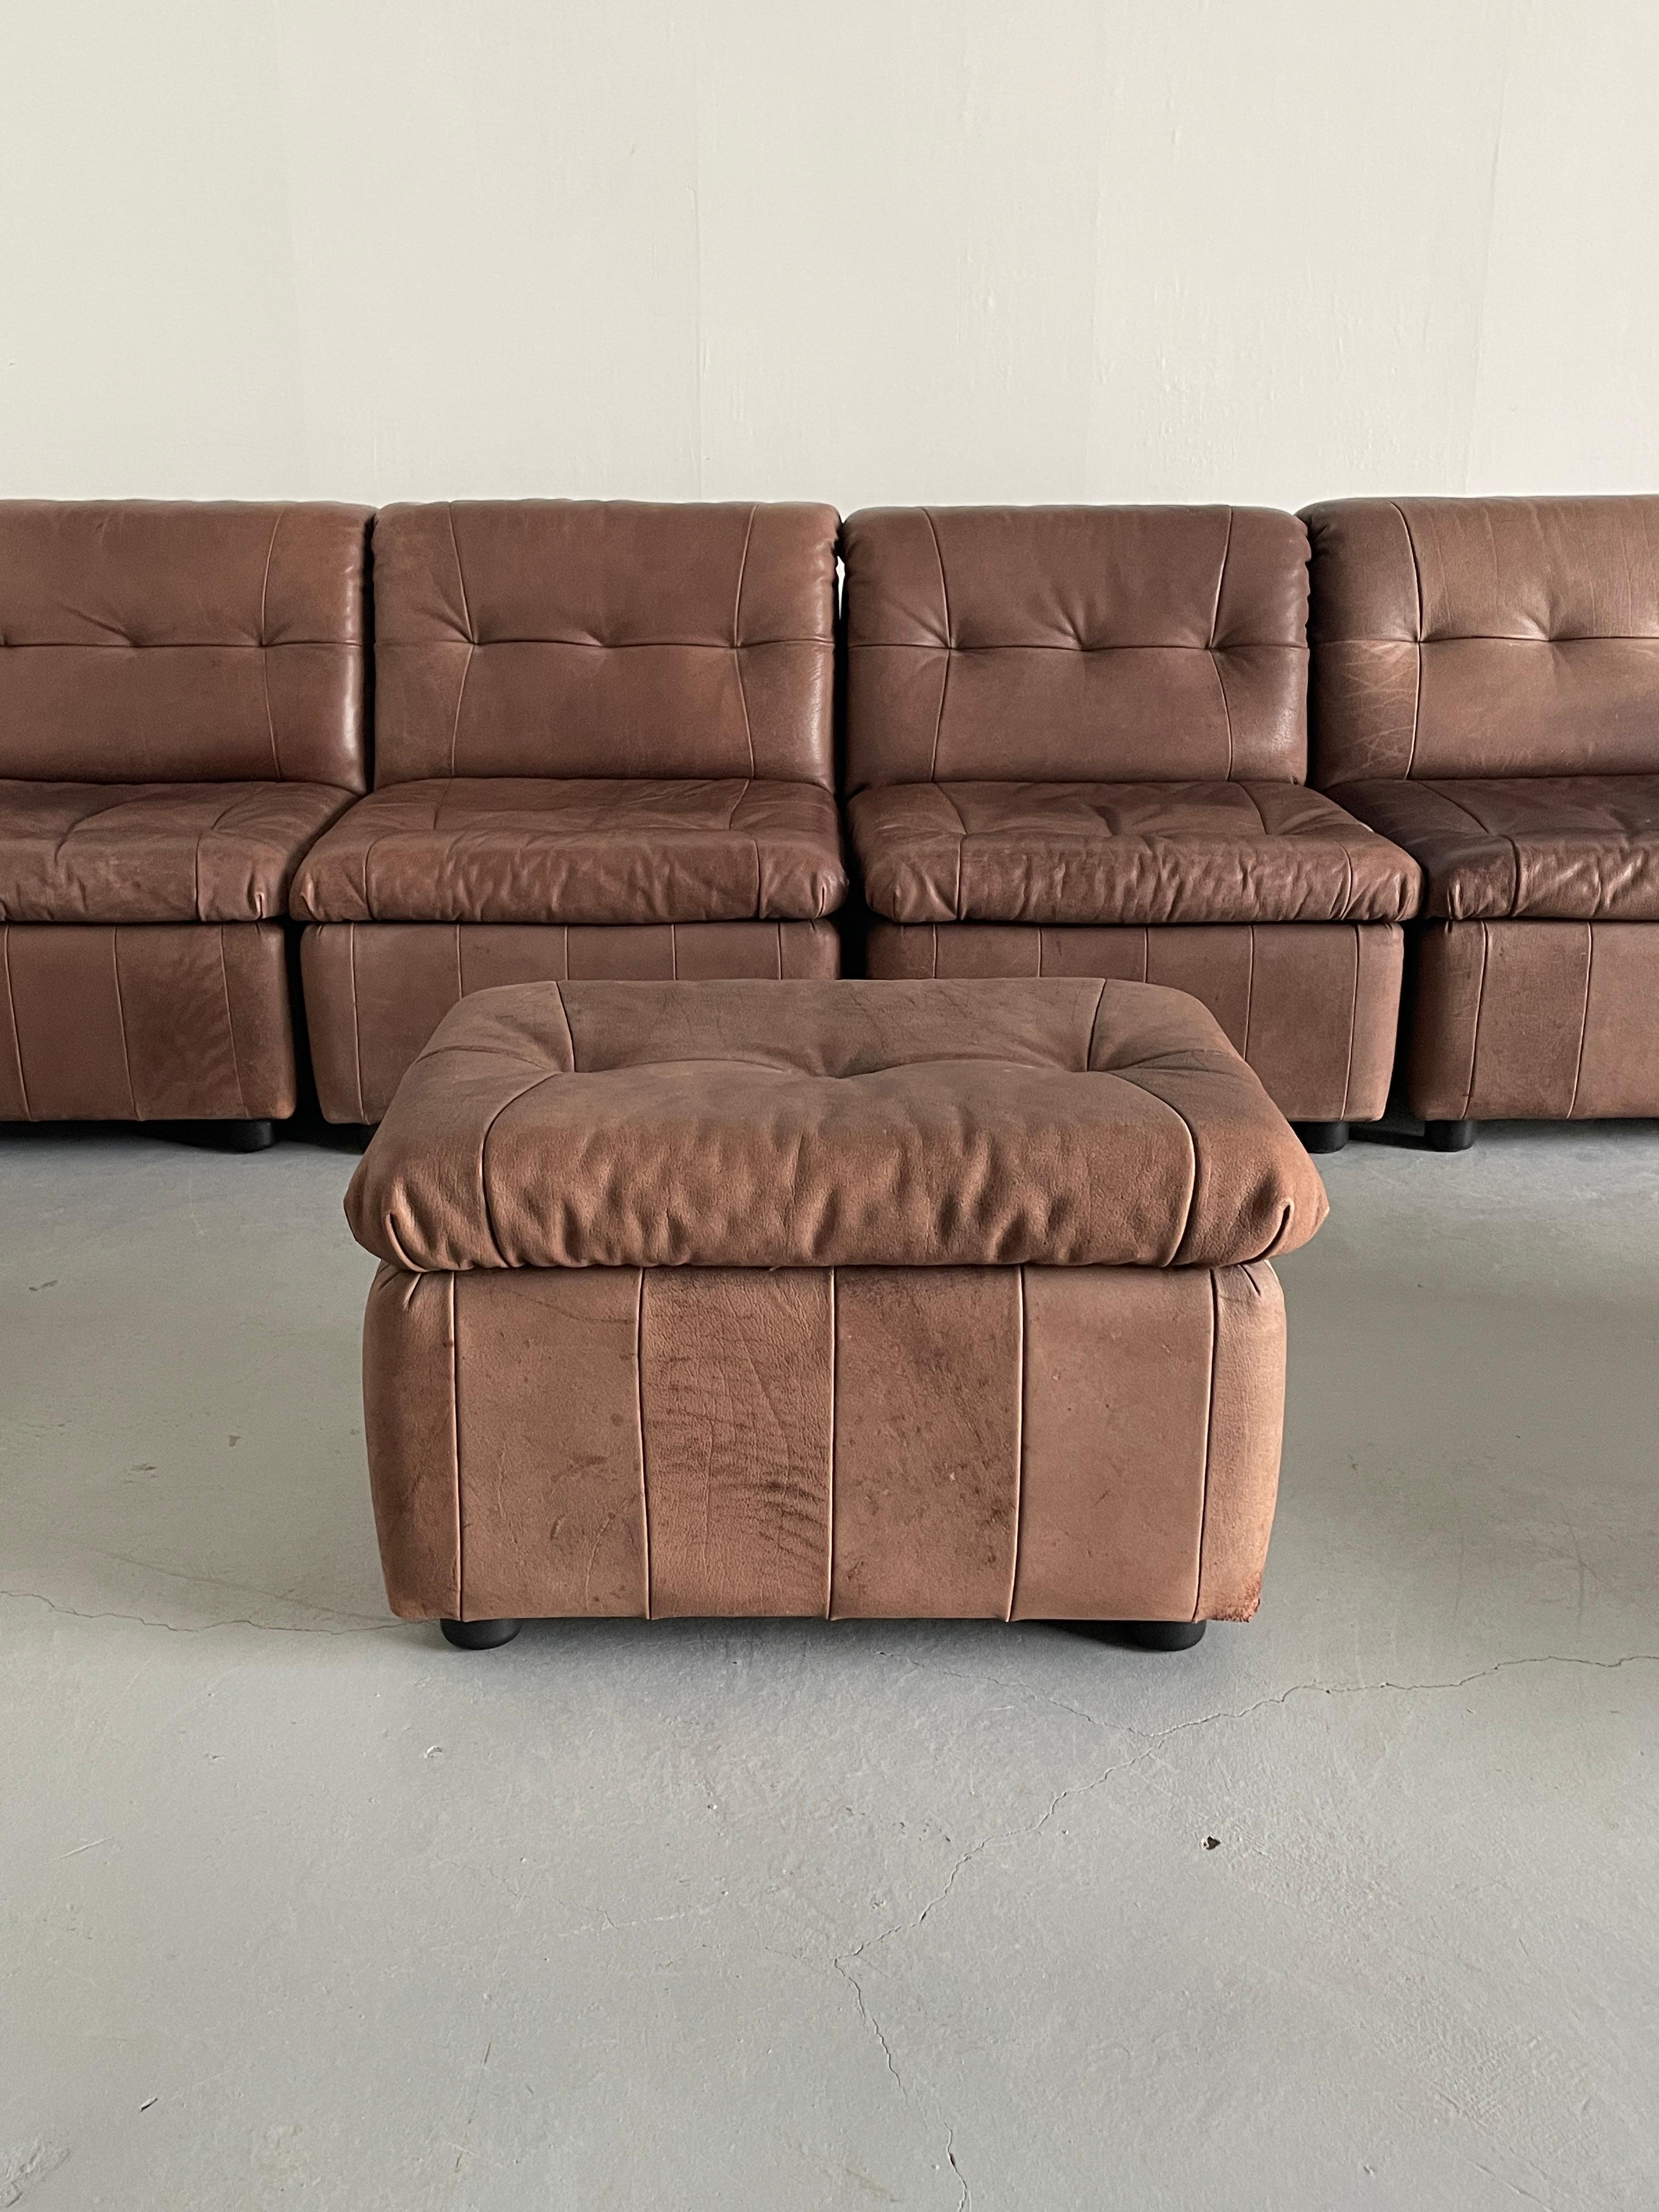 Mid-Century-Modern Patchwork Leather Modular Seating Set in the style of De Sede For Sale 2